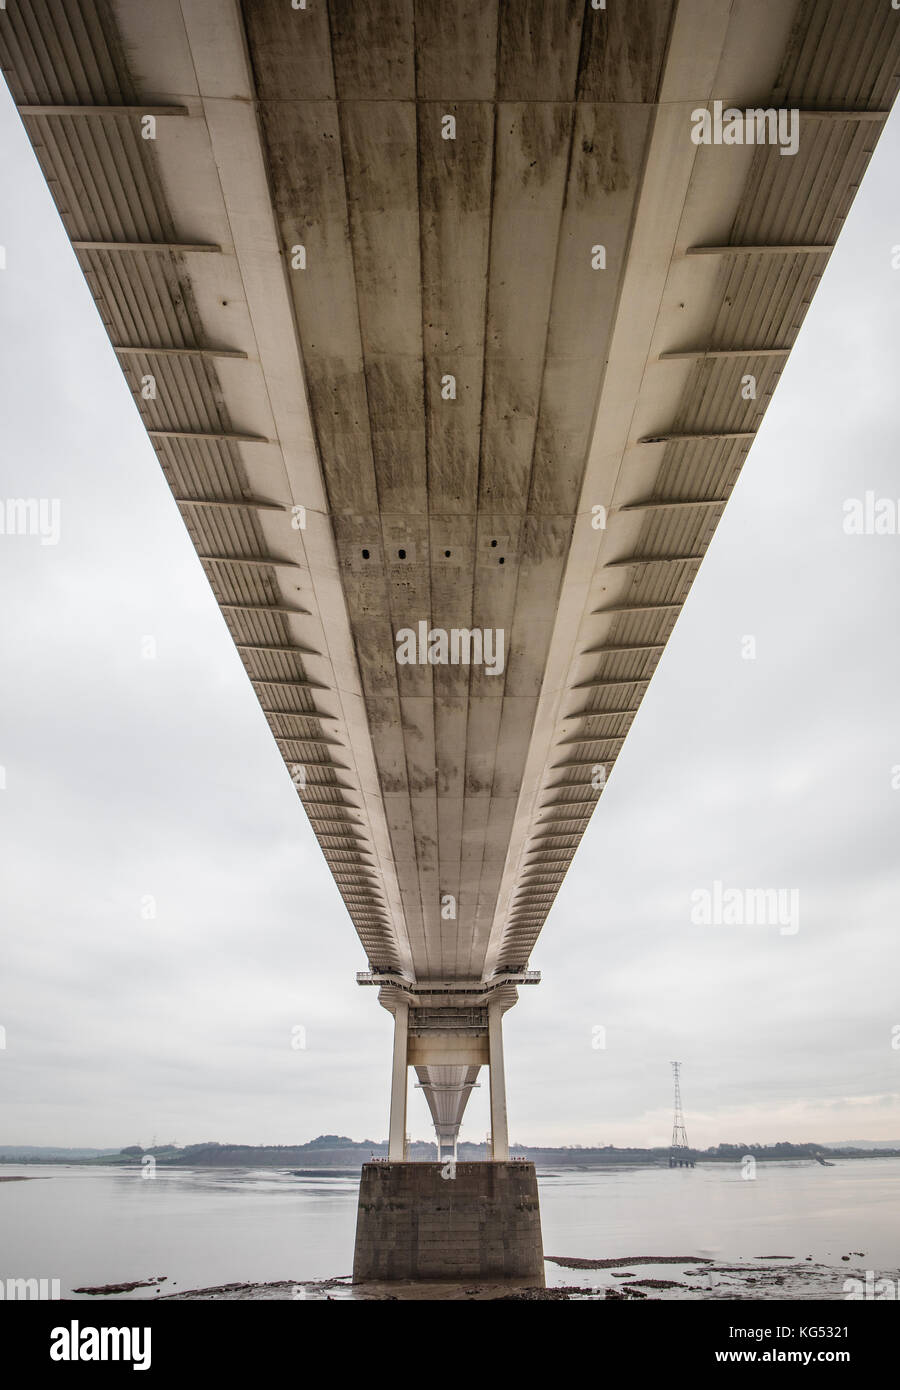 Severn Road Bridge over the River Severn linking Chepstow in South Wales and Aust on the English bank viewed from below Stock Photo